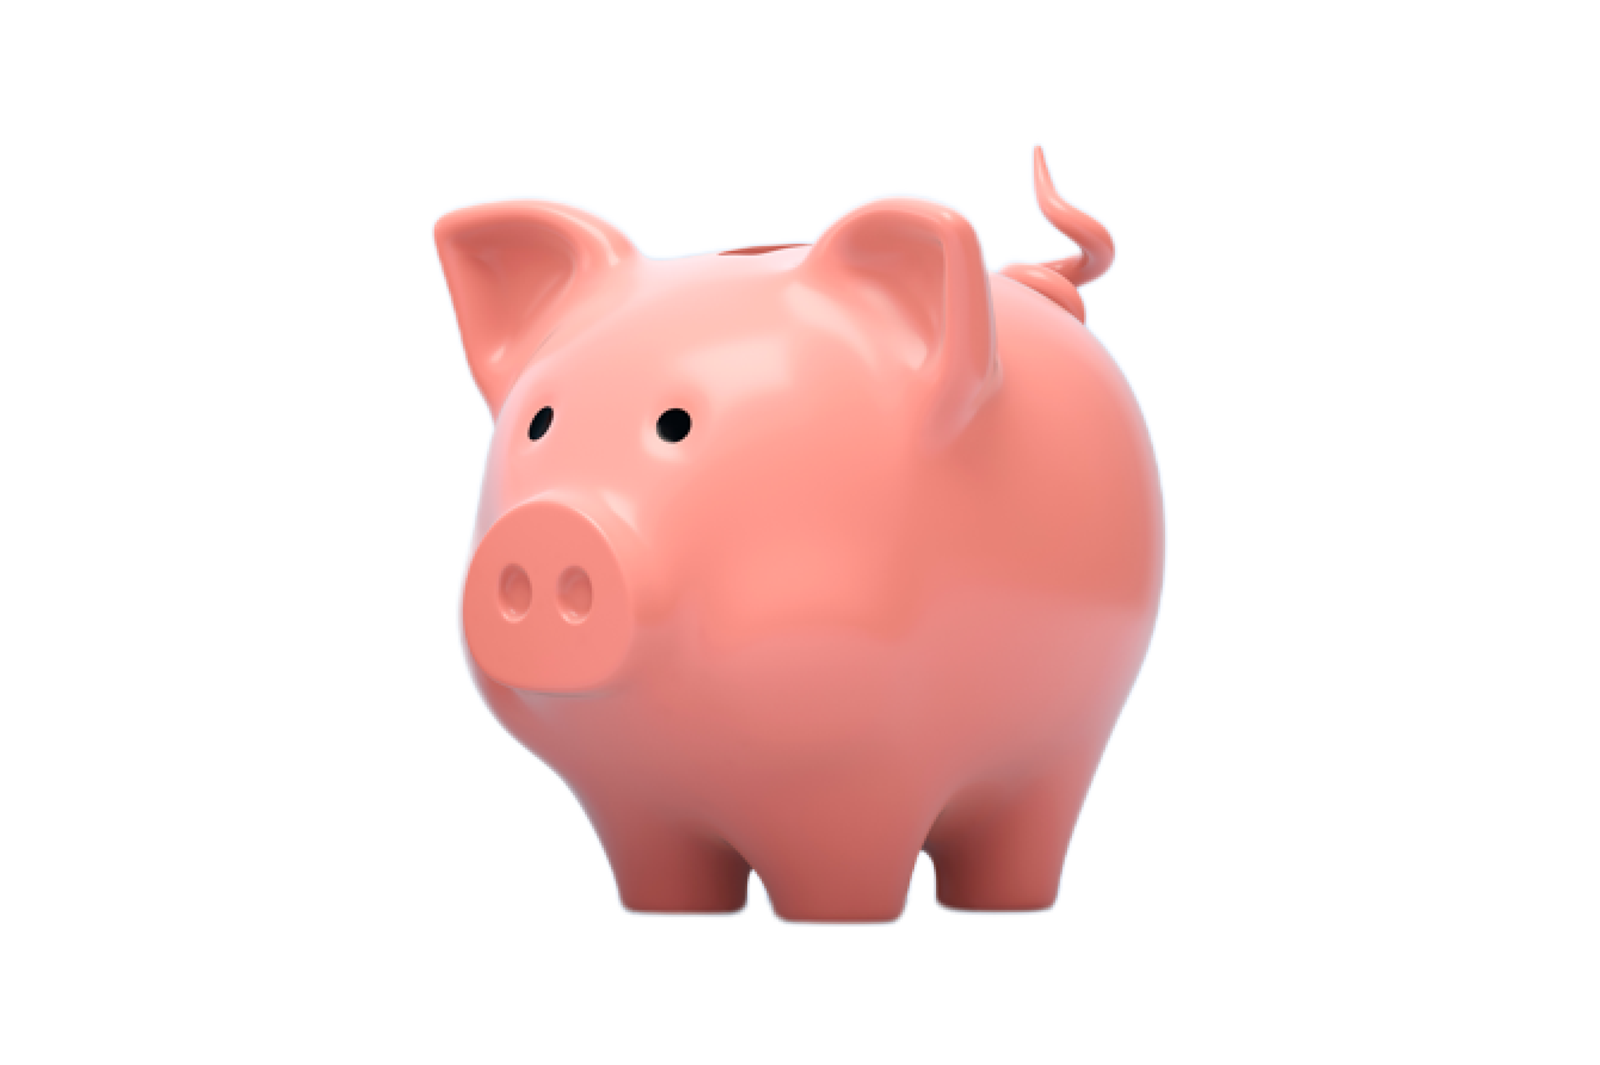 A shiny pink piggy bank with a content expression stands in the foreground